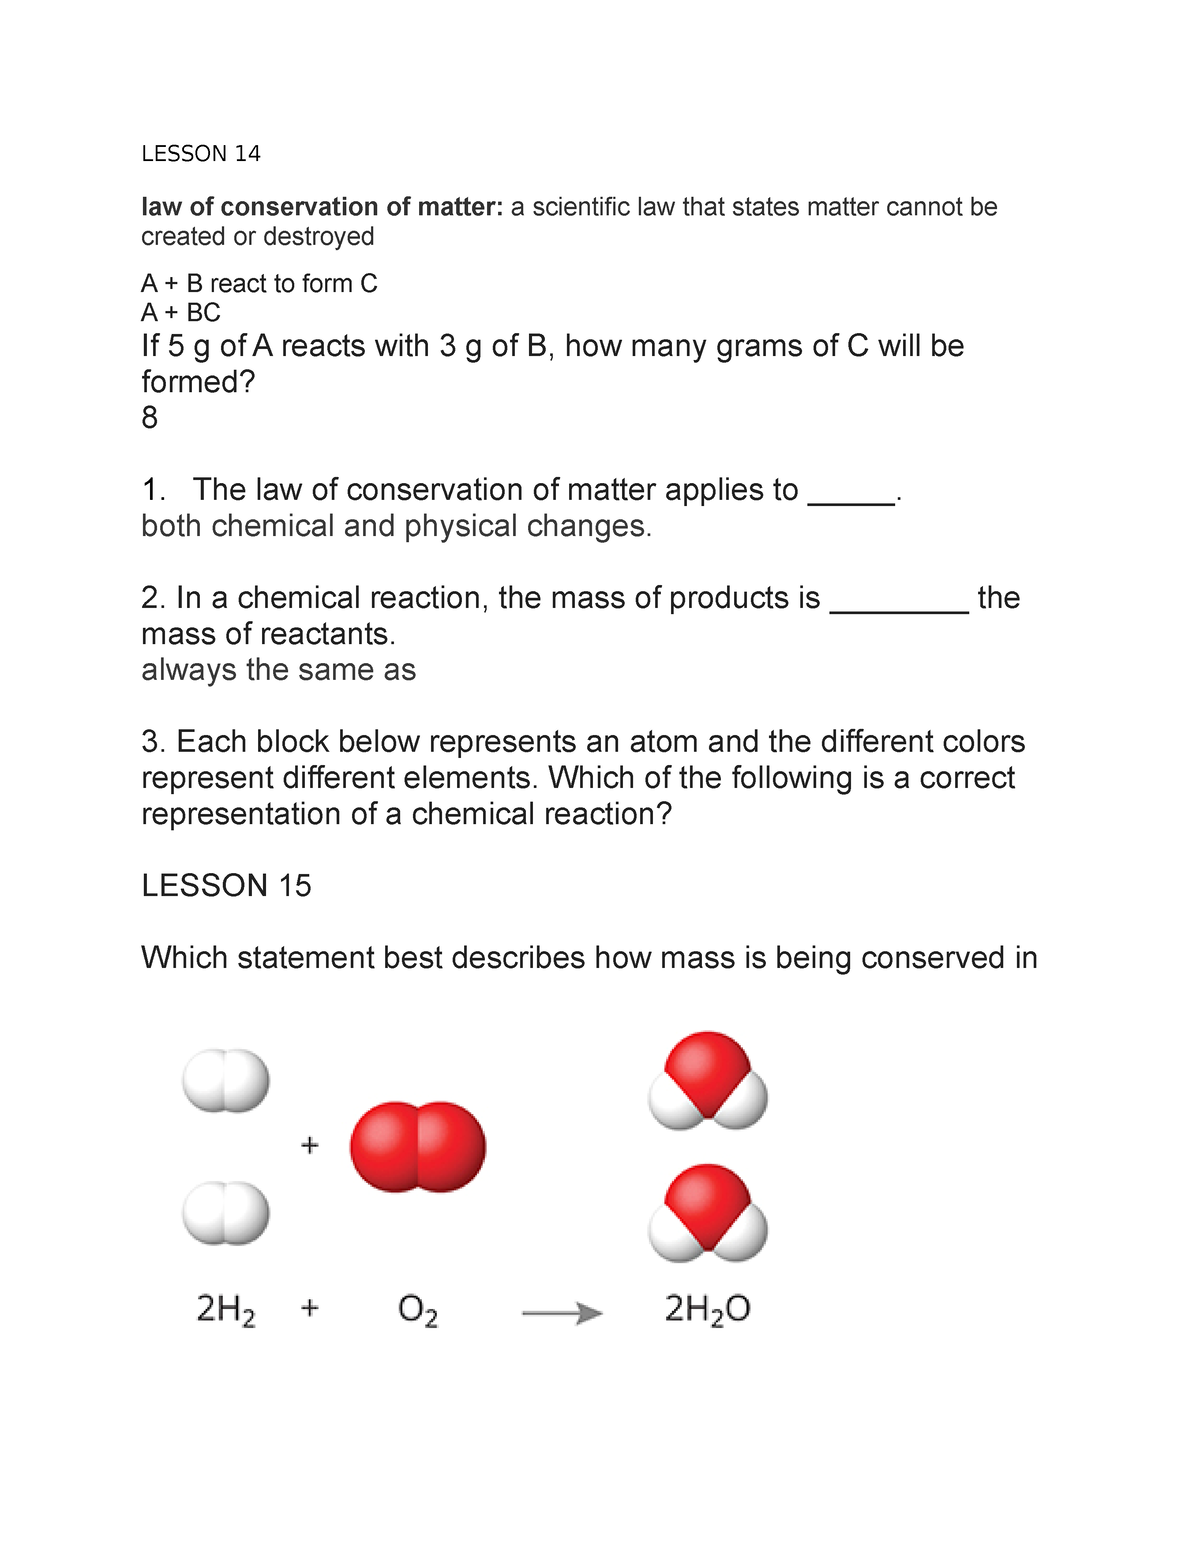 chemistry-lessons-14-17-lesson-14-law-of-conservation-of-matter-a